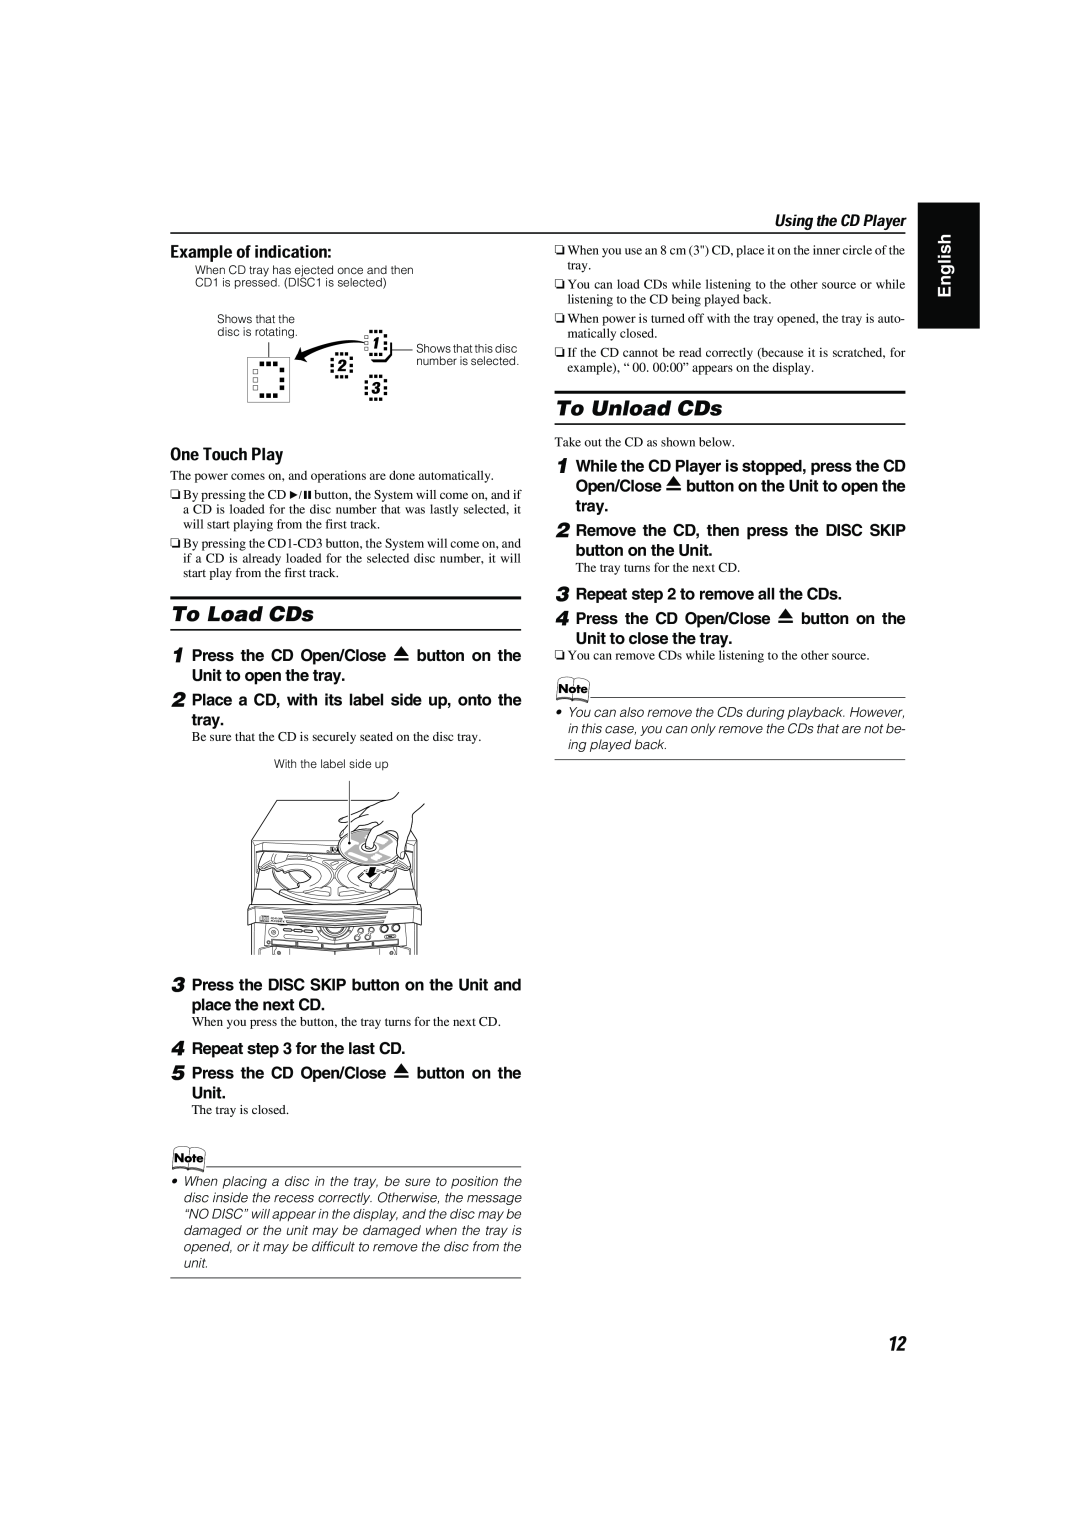 JVC MX-KB30 manual To Load CDs, To Unload CDs, Example of indication, English, One Touch Play, Unit to open the tray 